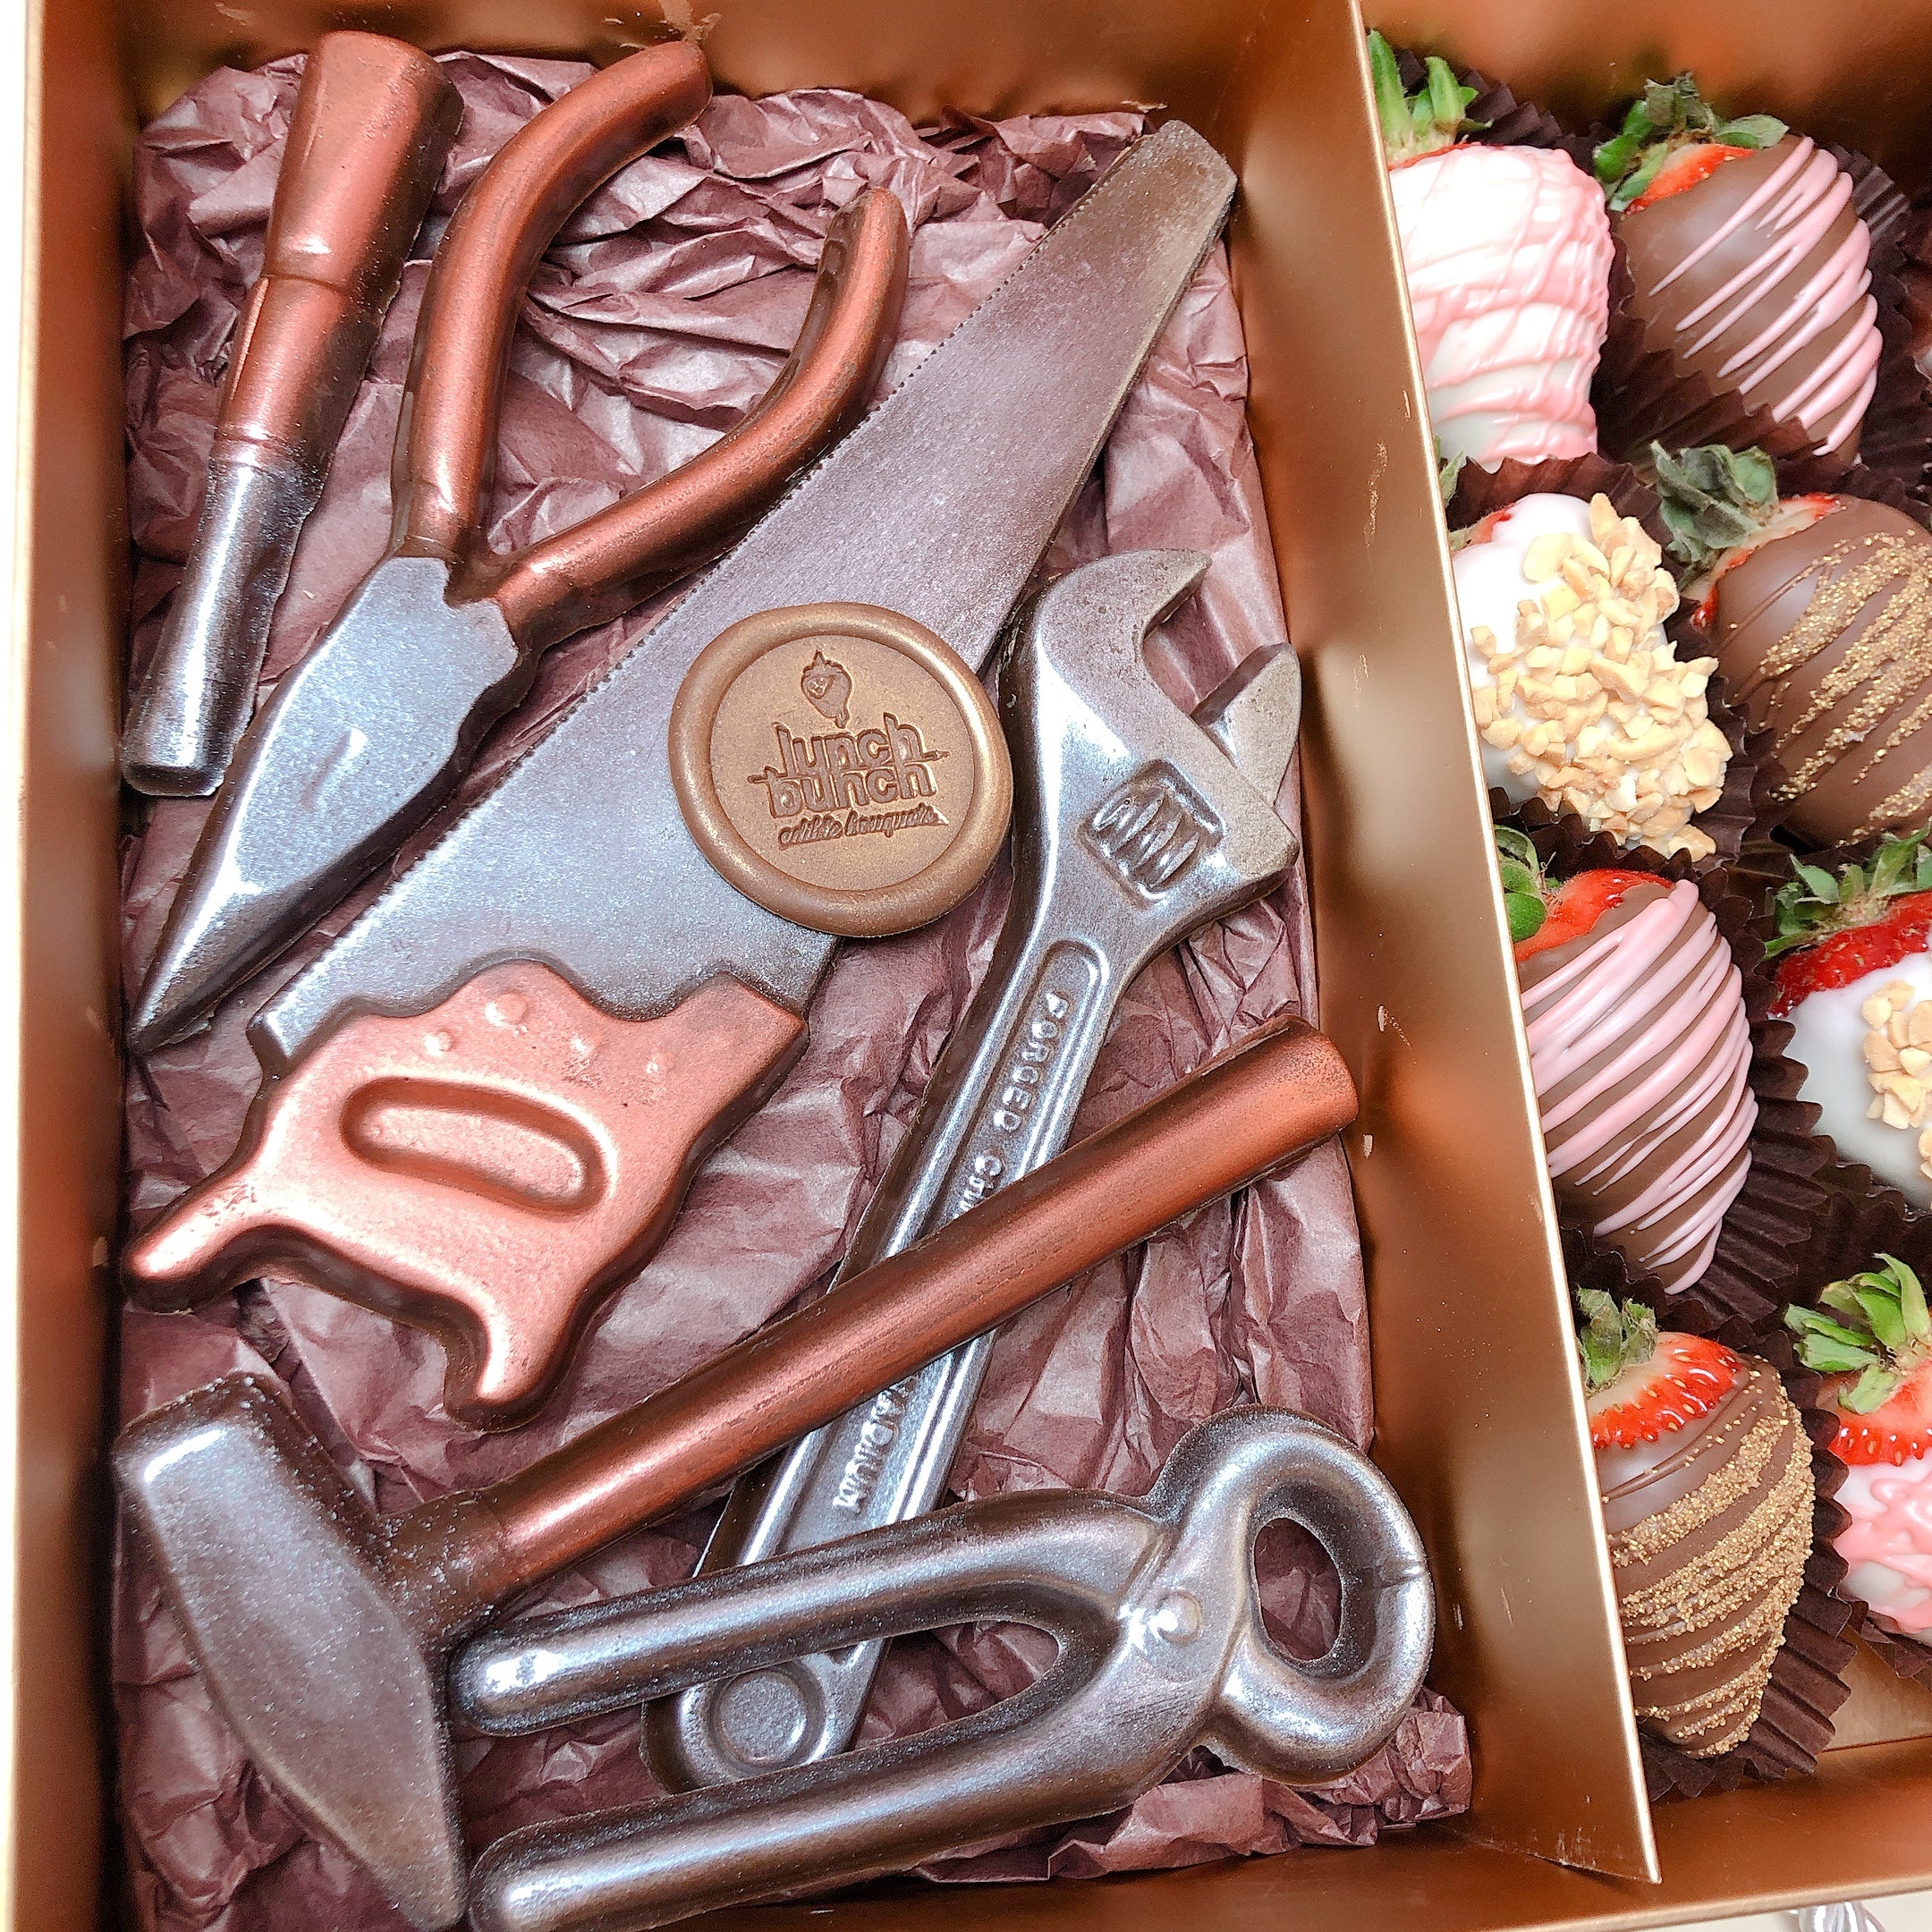 Chocolate covered strawberries gift box same day delivery Adelaide, chocolate tools gift box